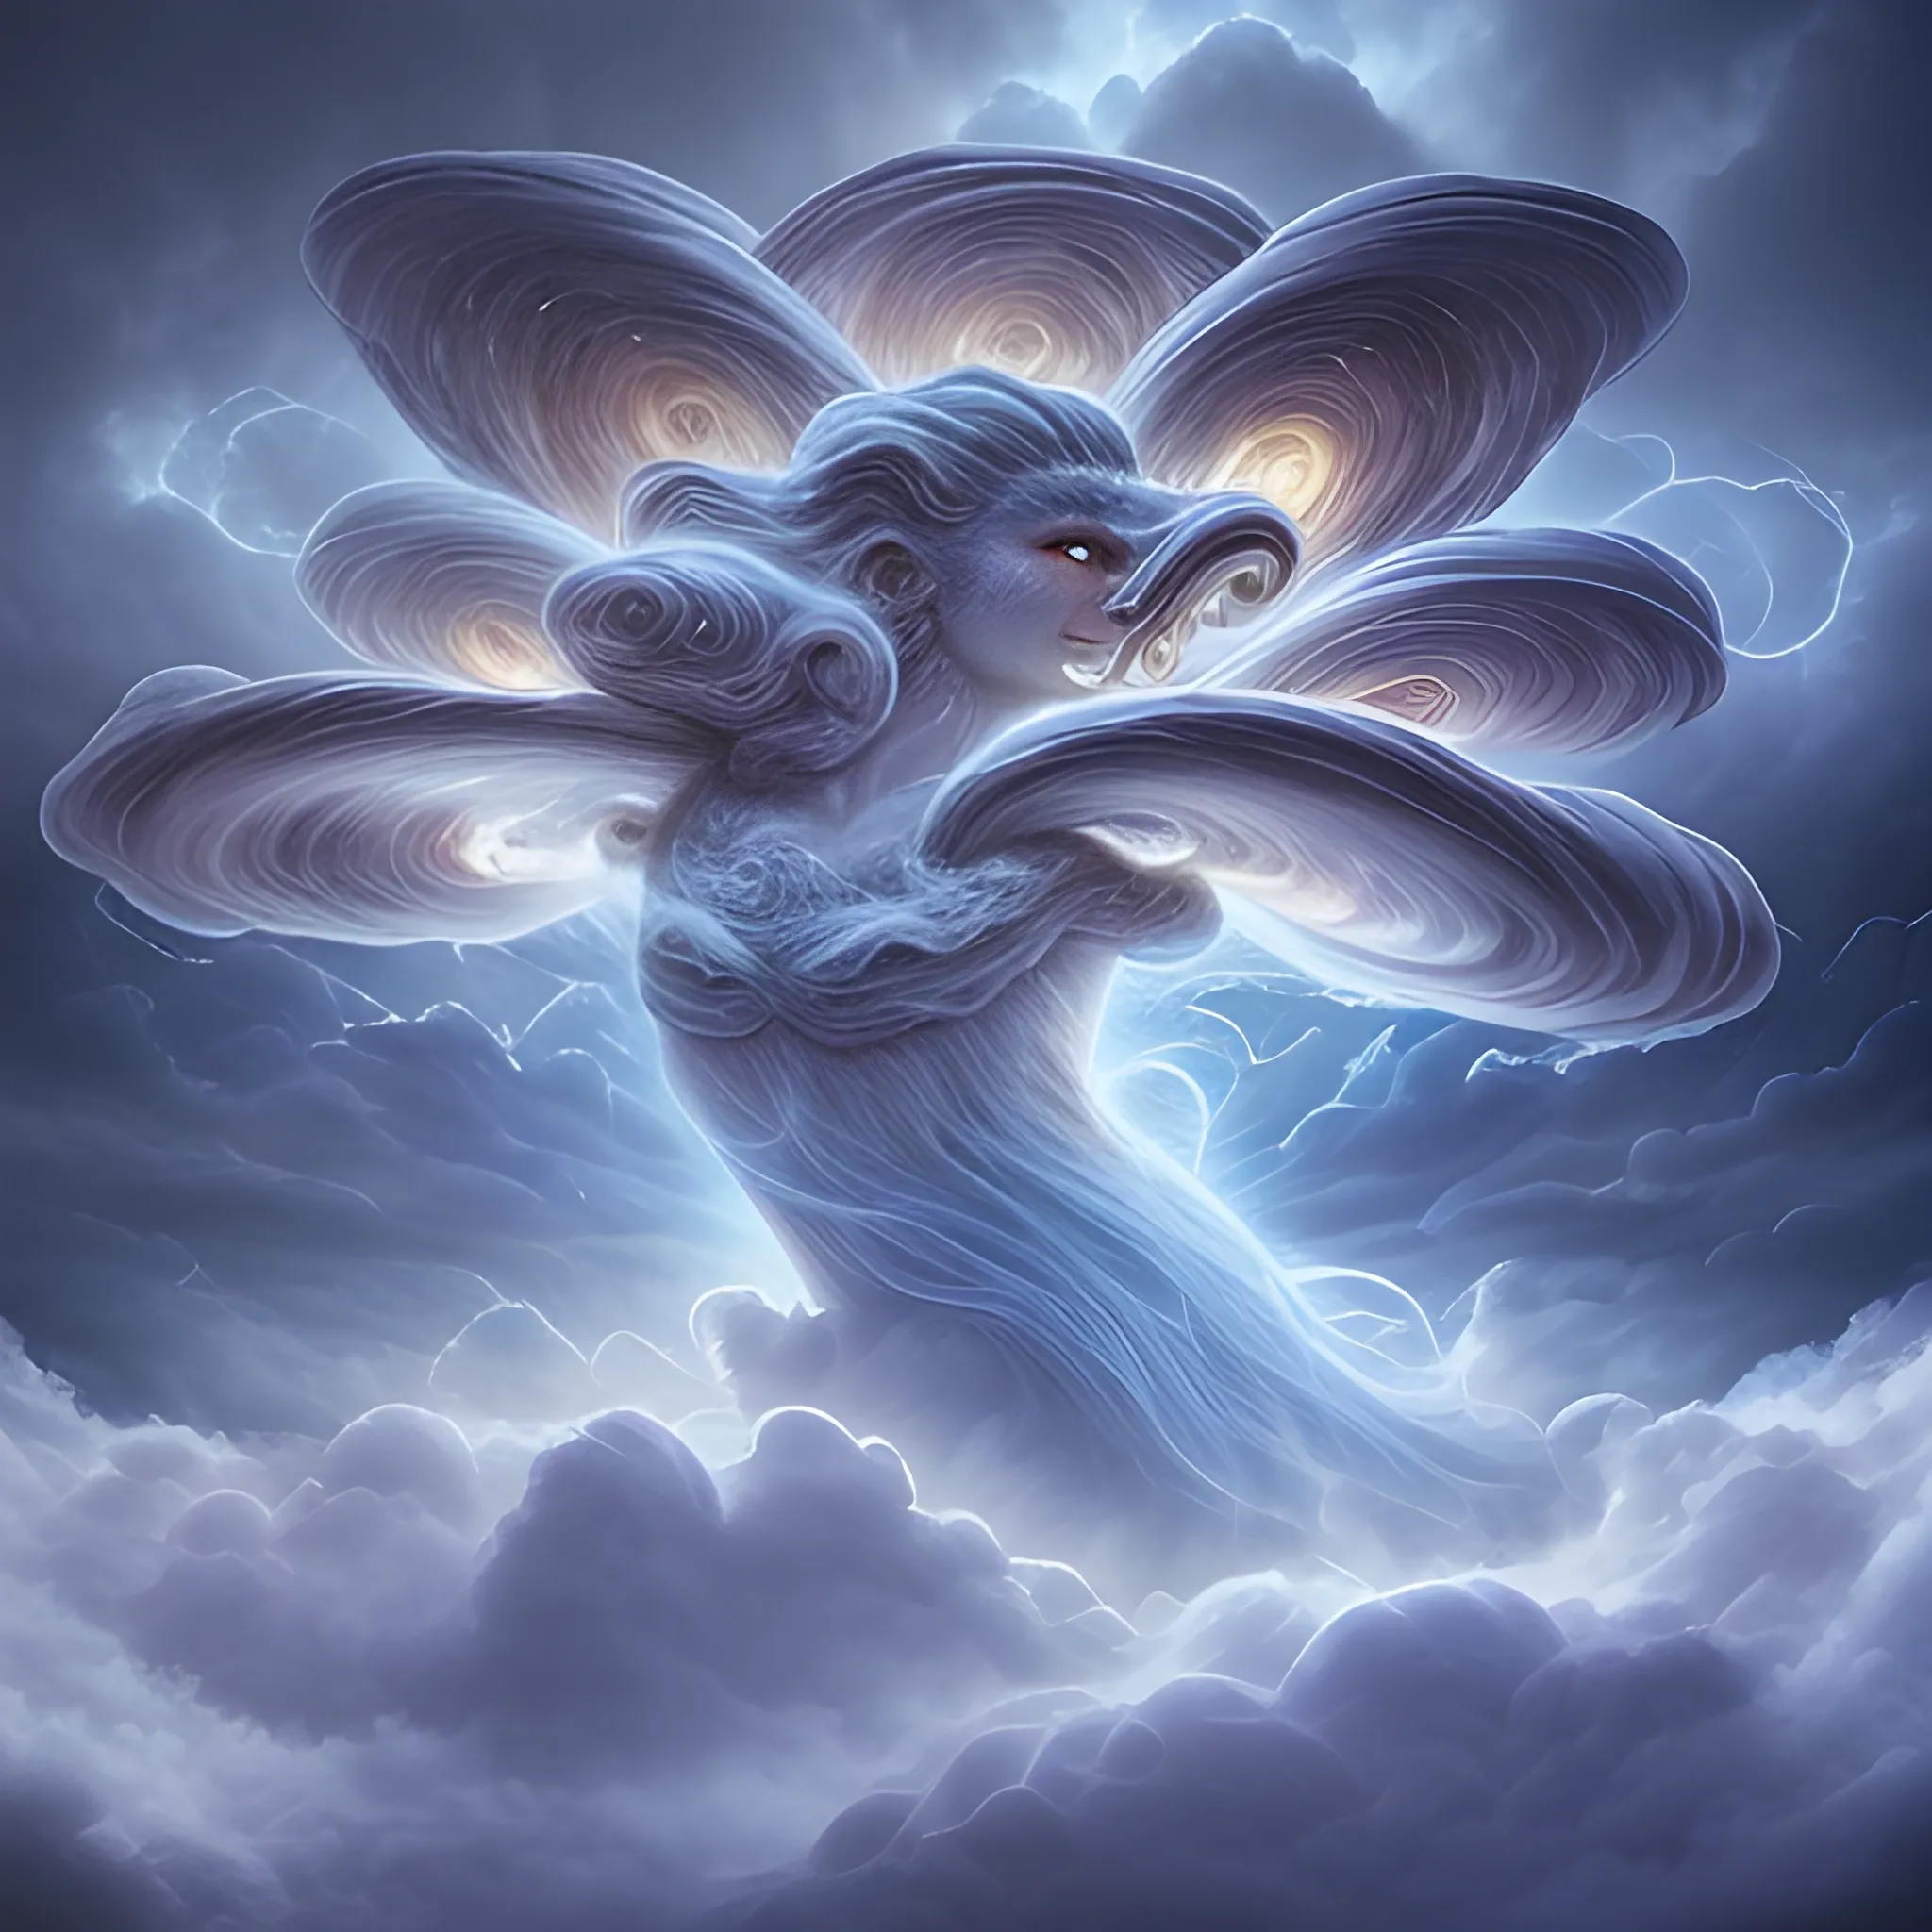  A celestial drama unfolded in the ethereal heavens as thick clouds formed an awe-inspiring spectacle. The billows weaved together, creating a wondrous creature of mythical lore. 